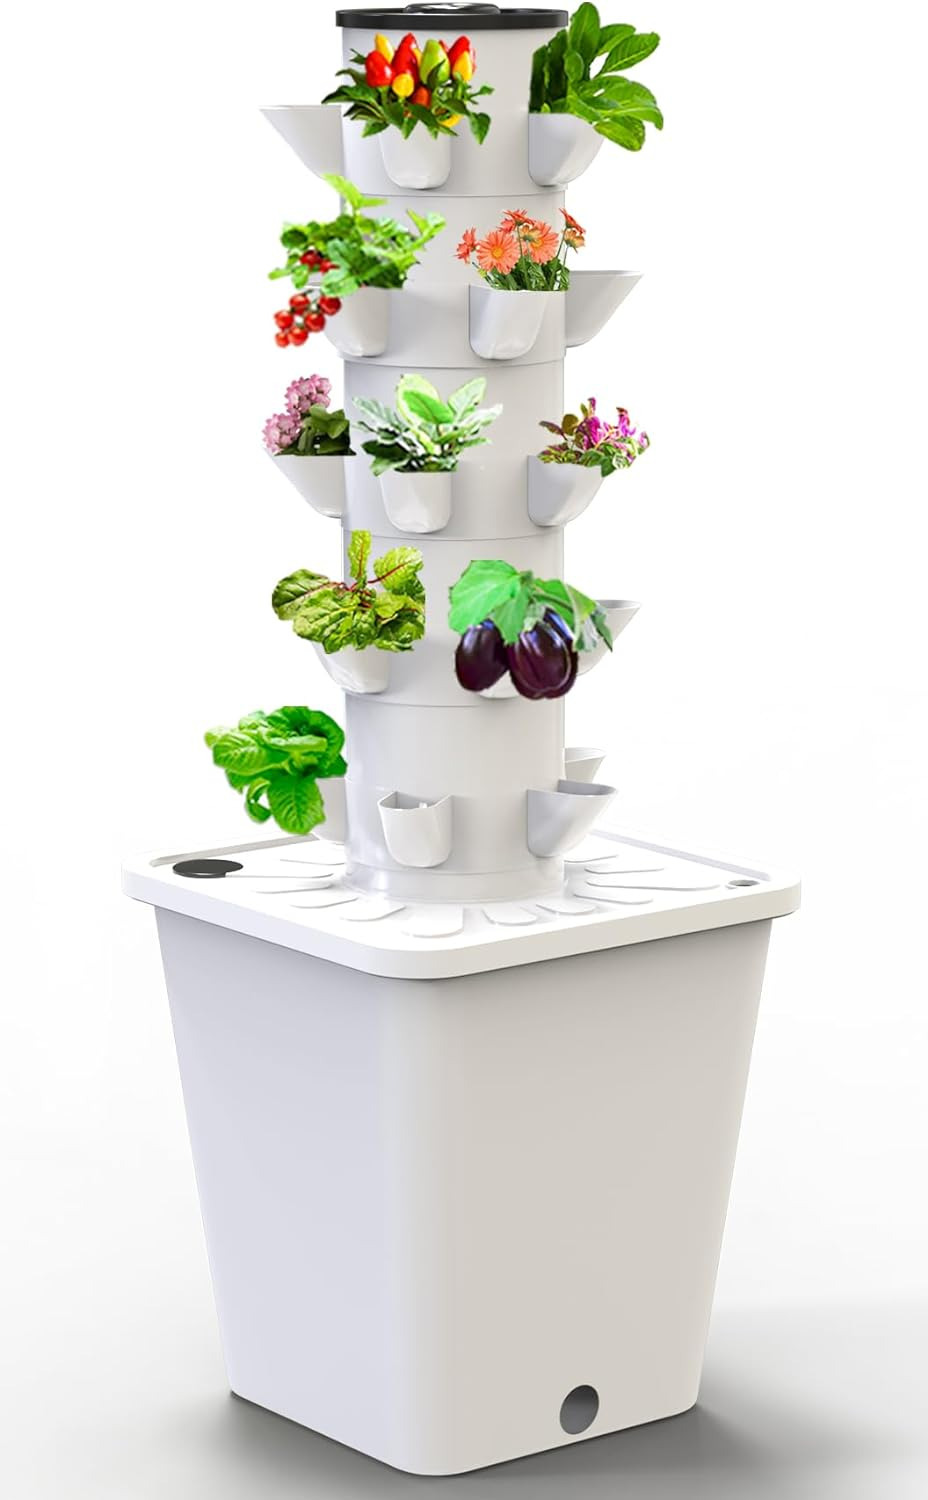 Sjzx Hydroponic Growing System(No Seedlings Included) | 25-Plant Hydroponic Syst